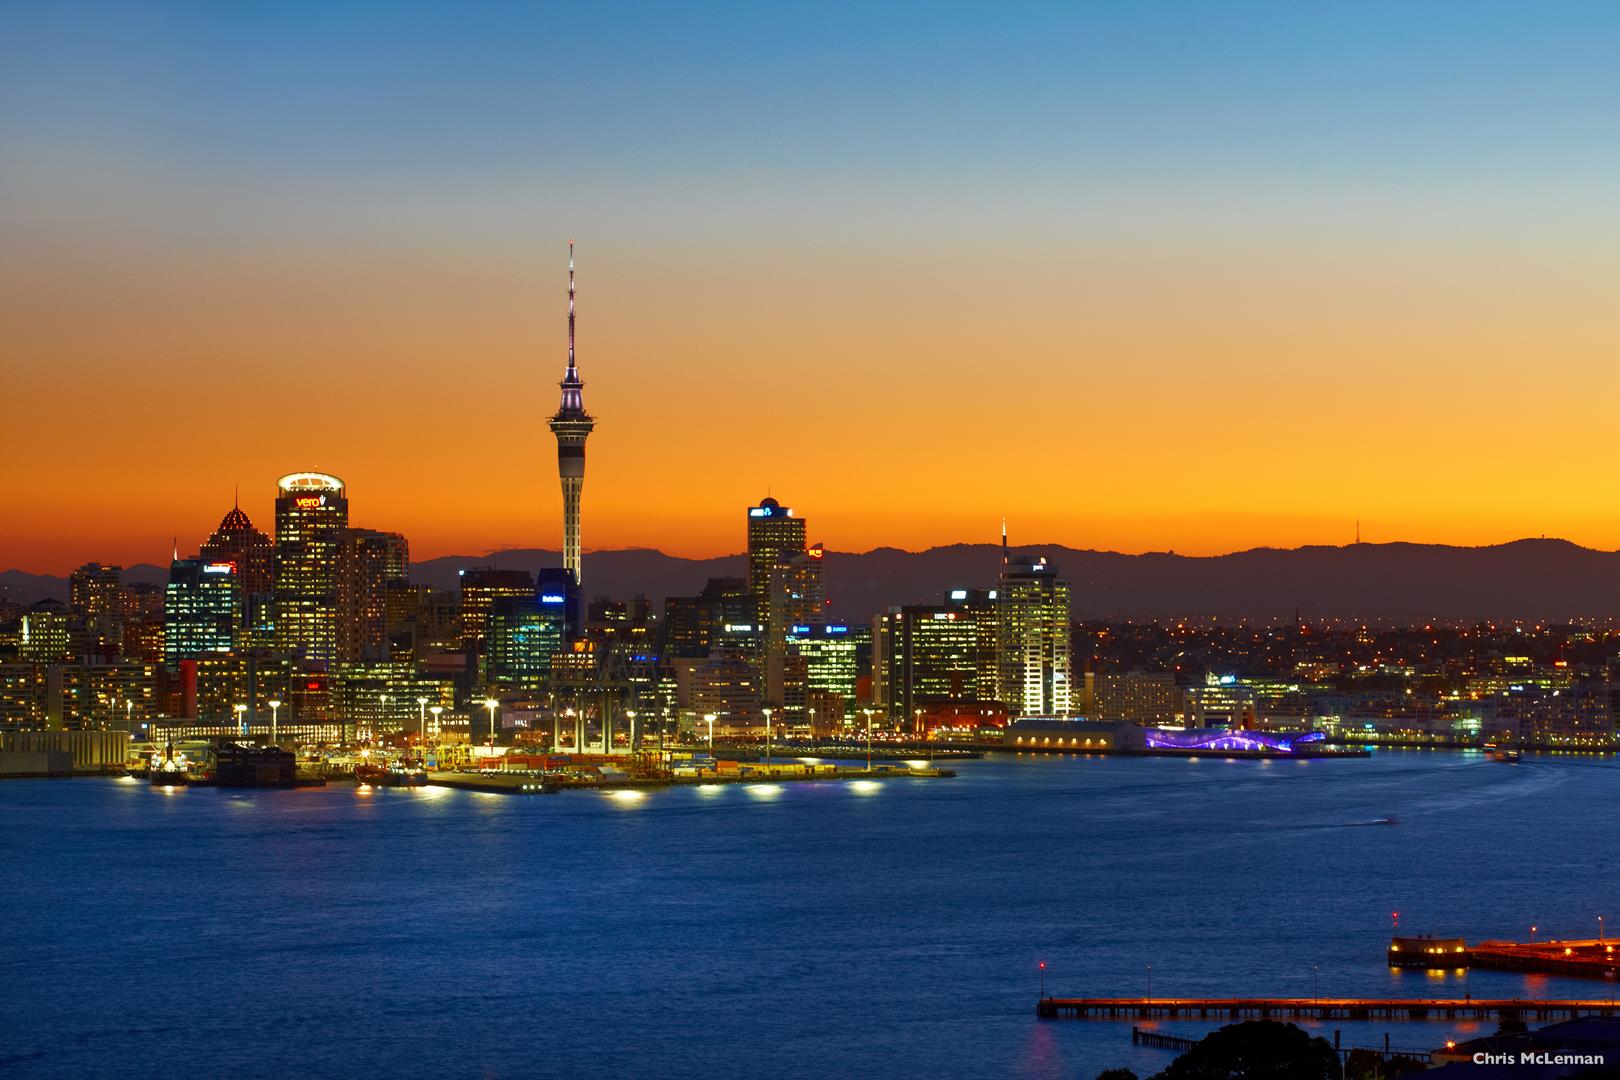 As the sun sets over the Waitakere Ranges and the Sky Tower pierces the evening glow, the promise of fun and food fills the air in Auckland, New Zealand’s largest city